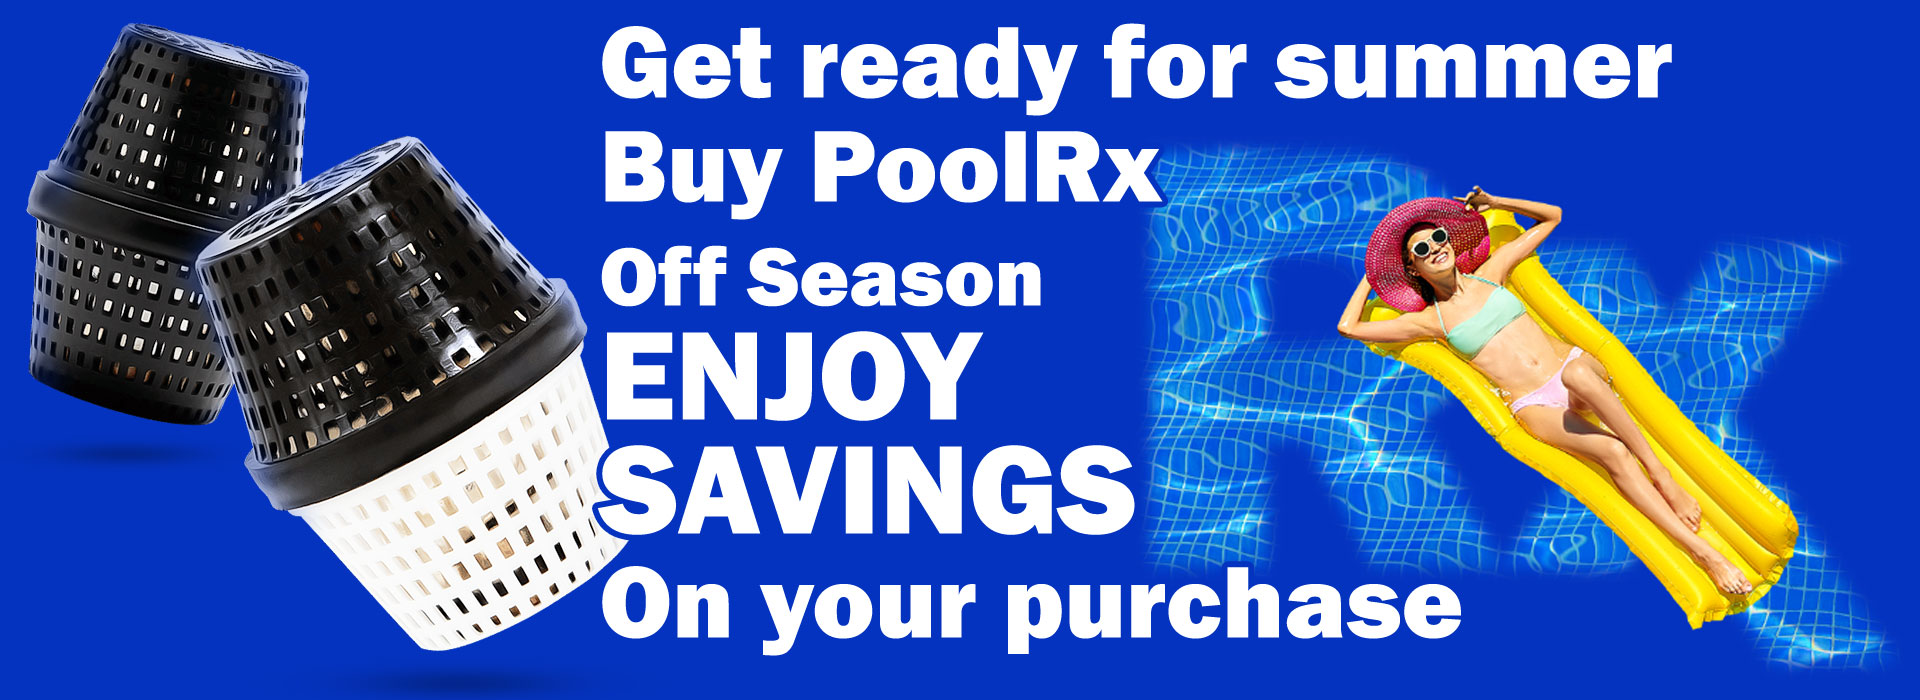 PoolRX Special Prices